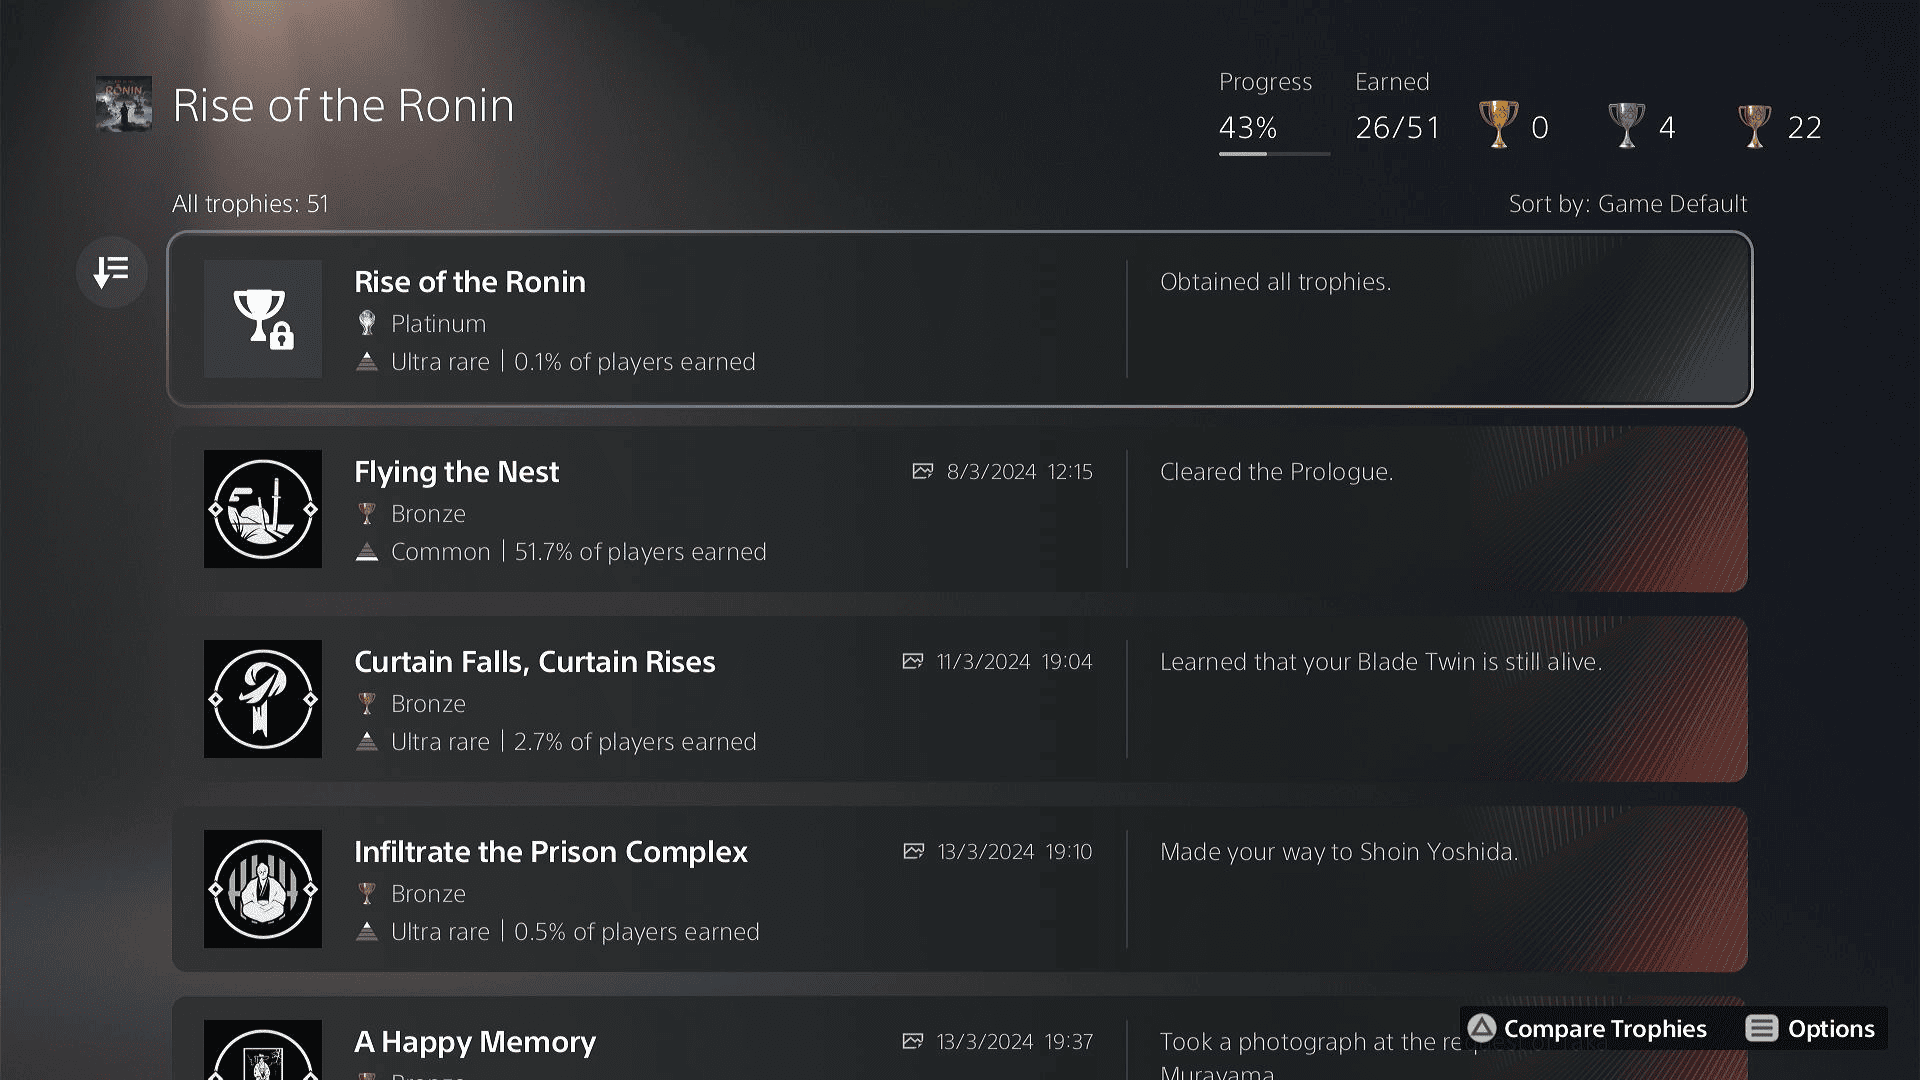 A screenshot of the video game "Rise of the Ronin" achievement and trophy guide showing progress and several unlocked achievements.